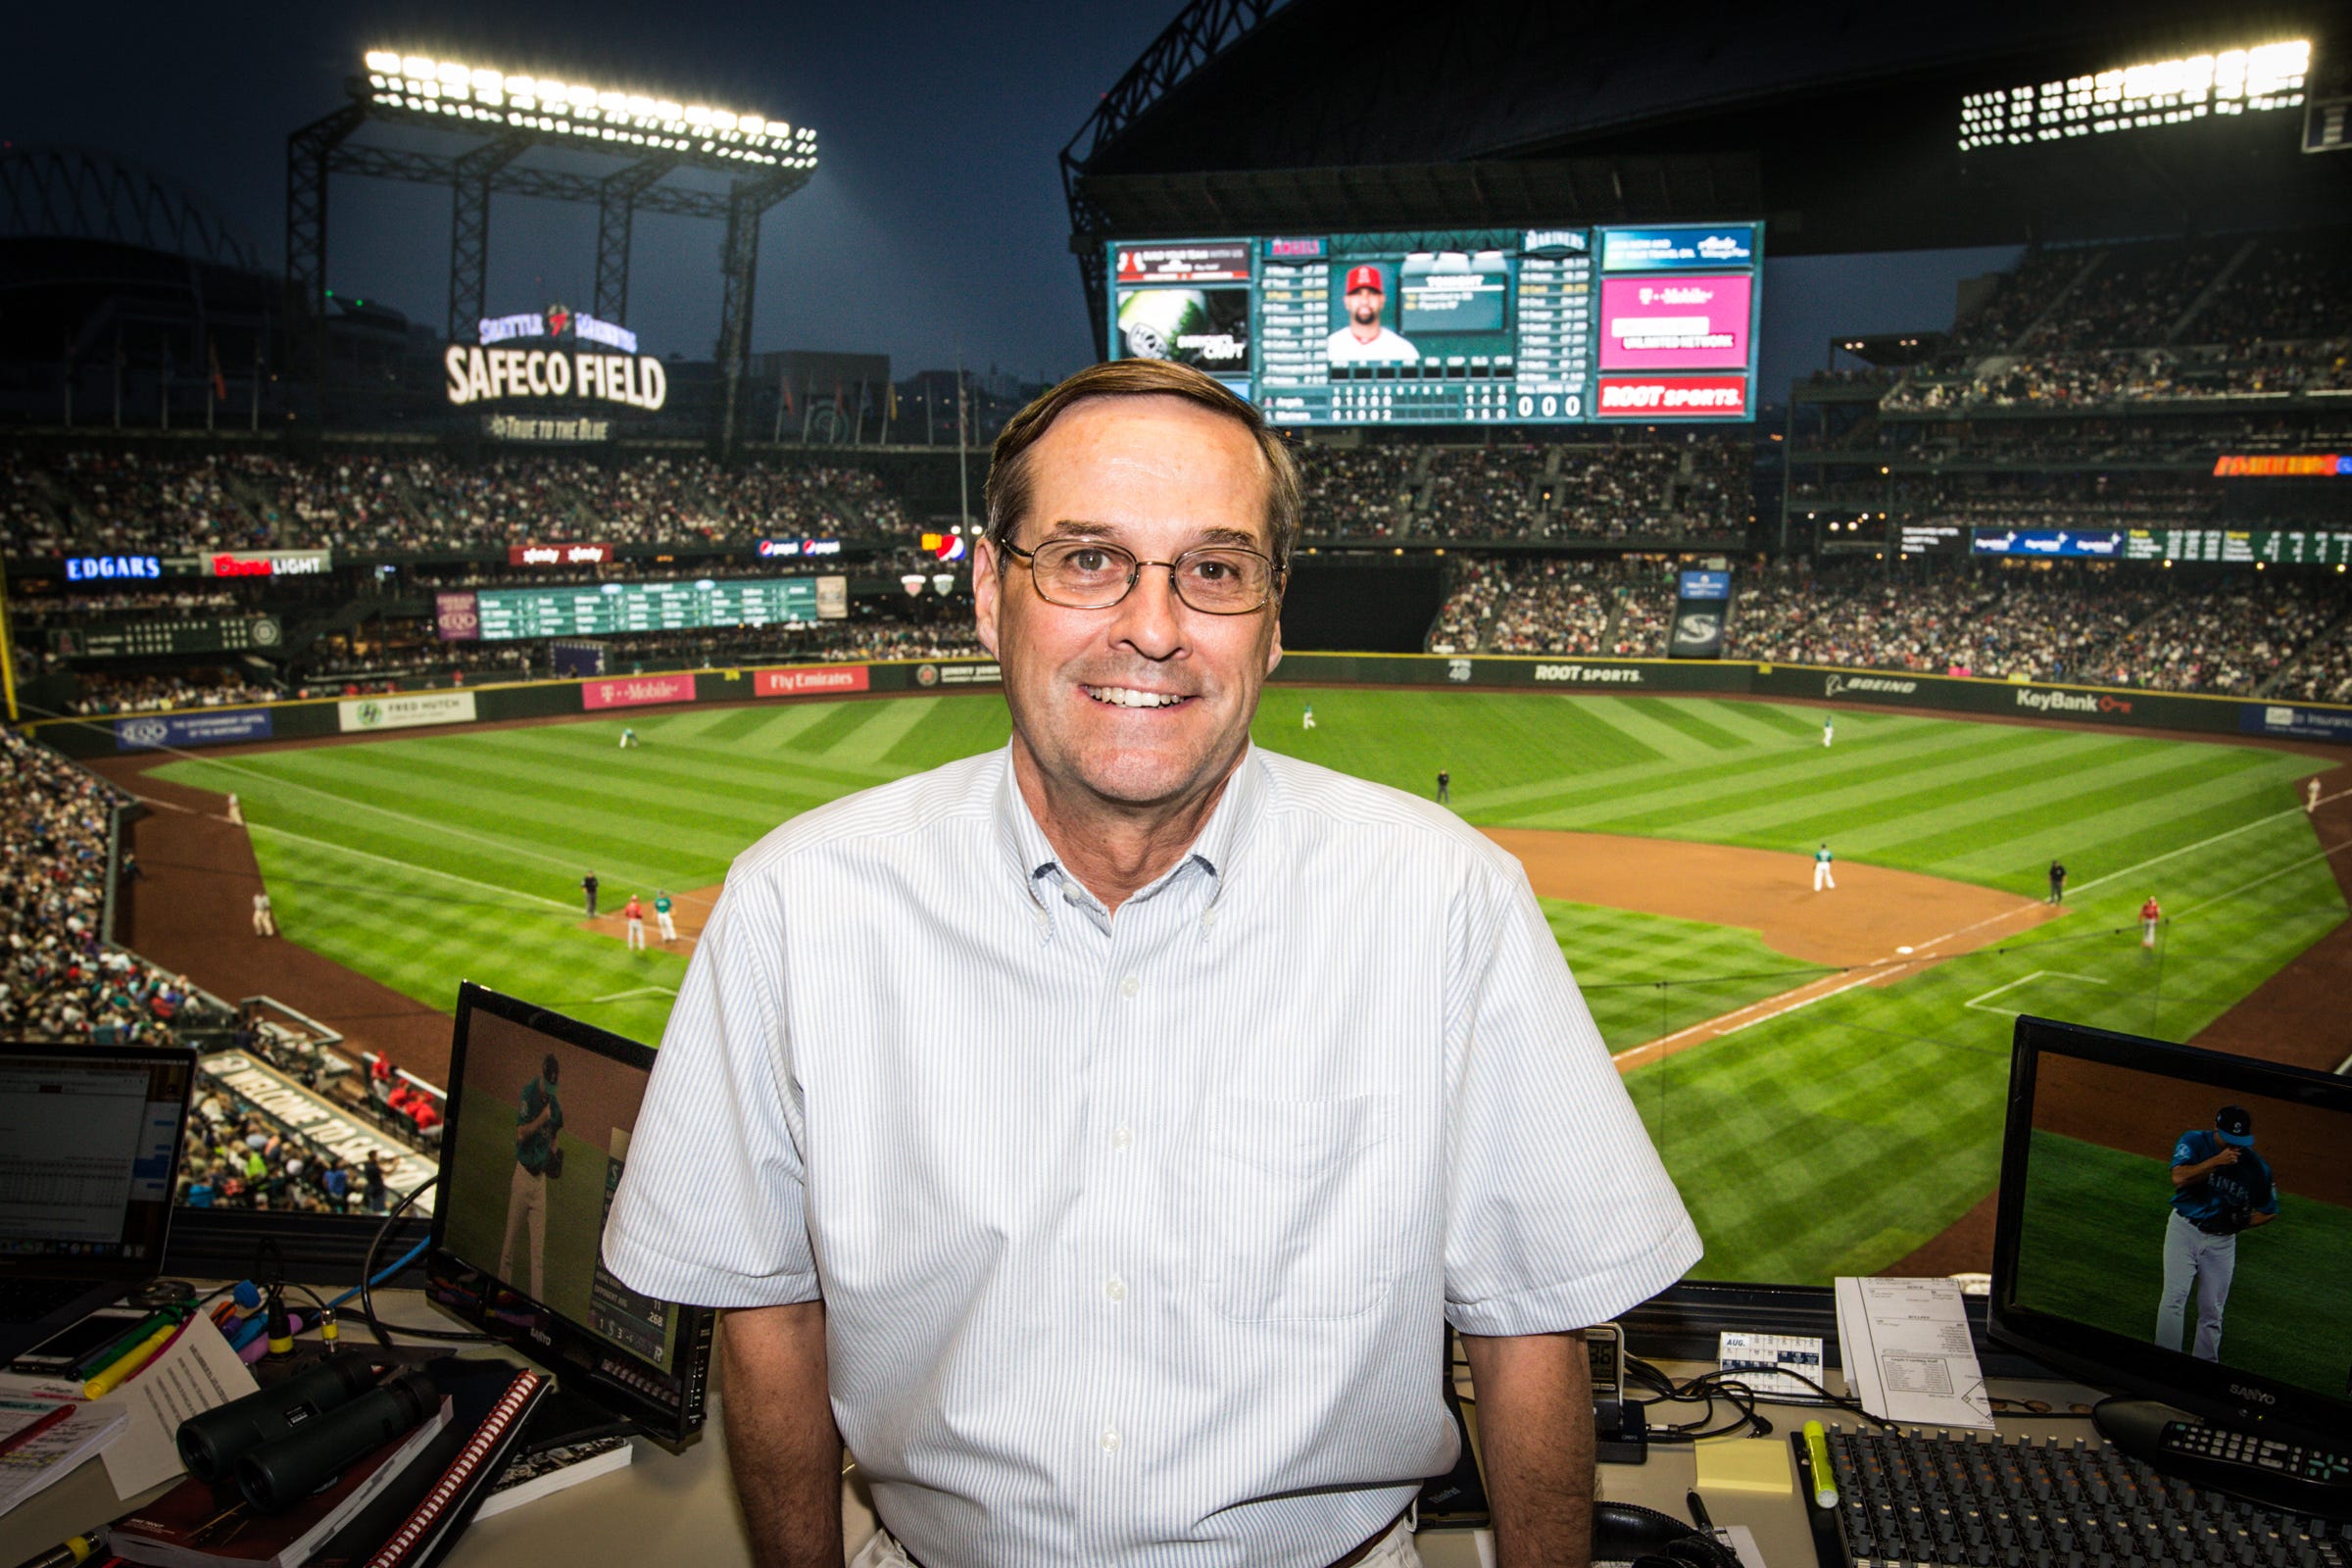 Rick Rizzs: The goal of Mariners radio broadcast is to let fans